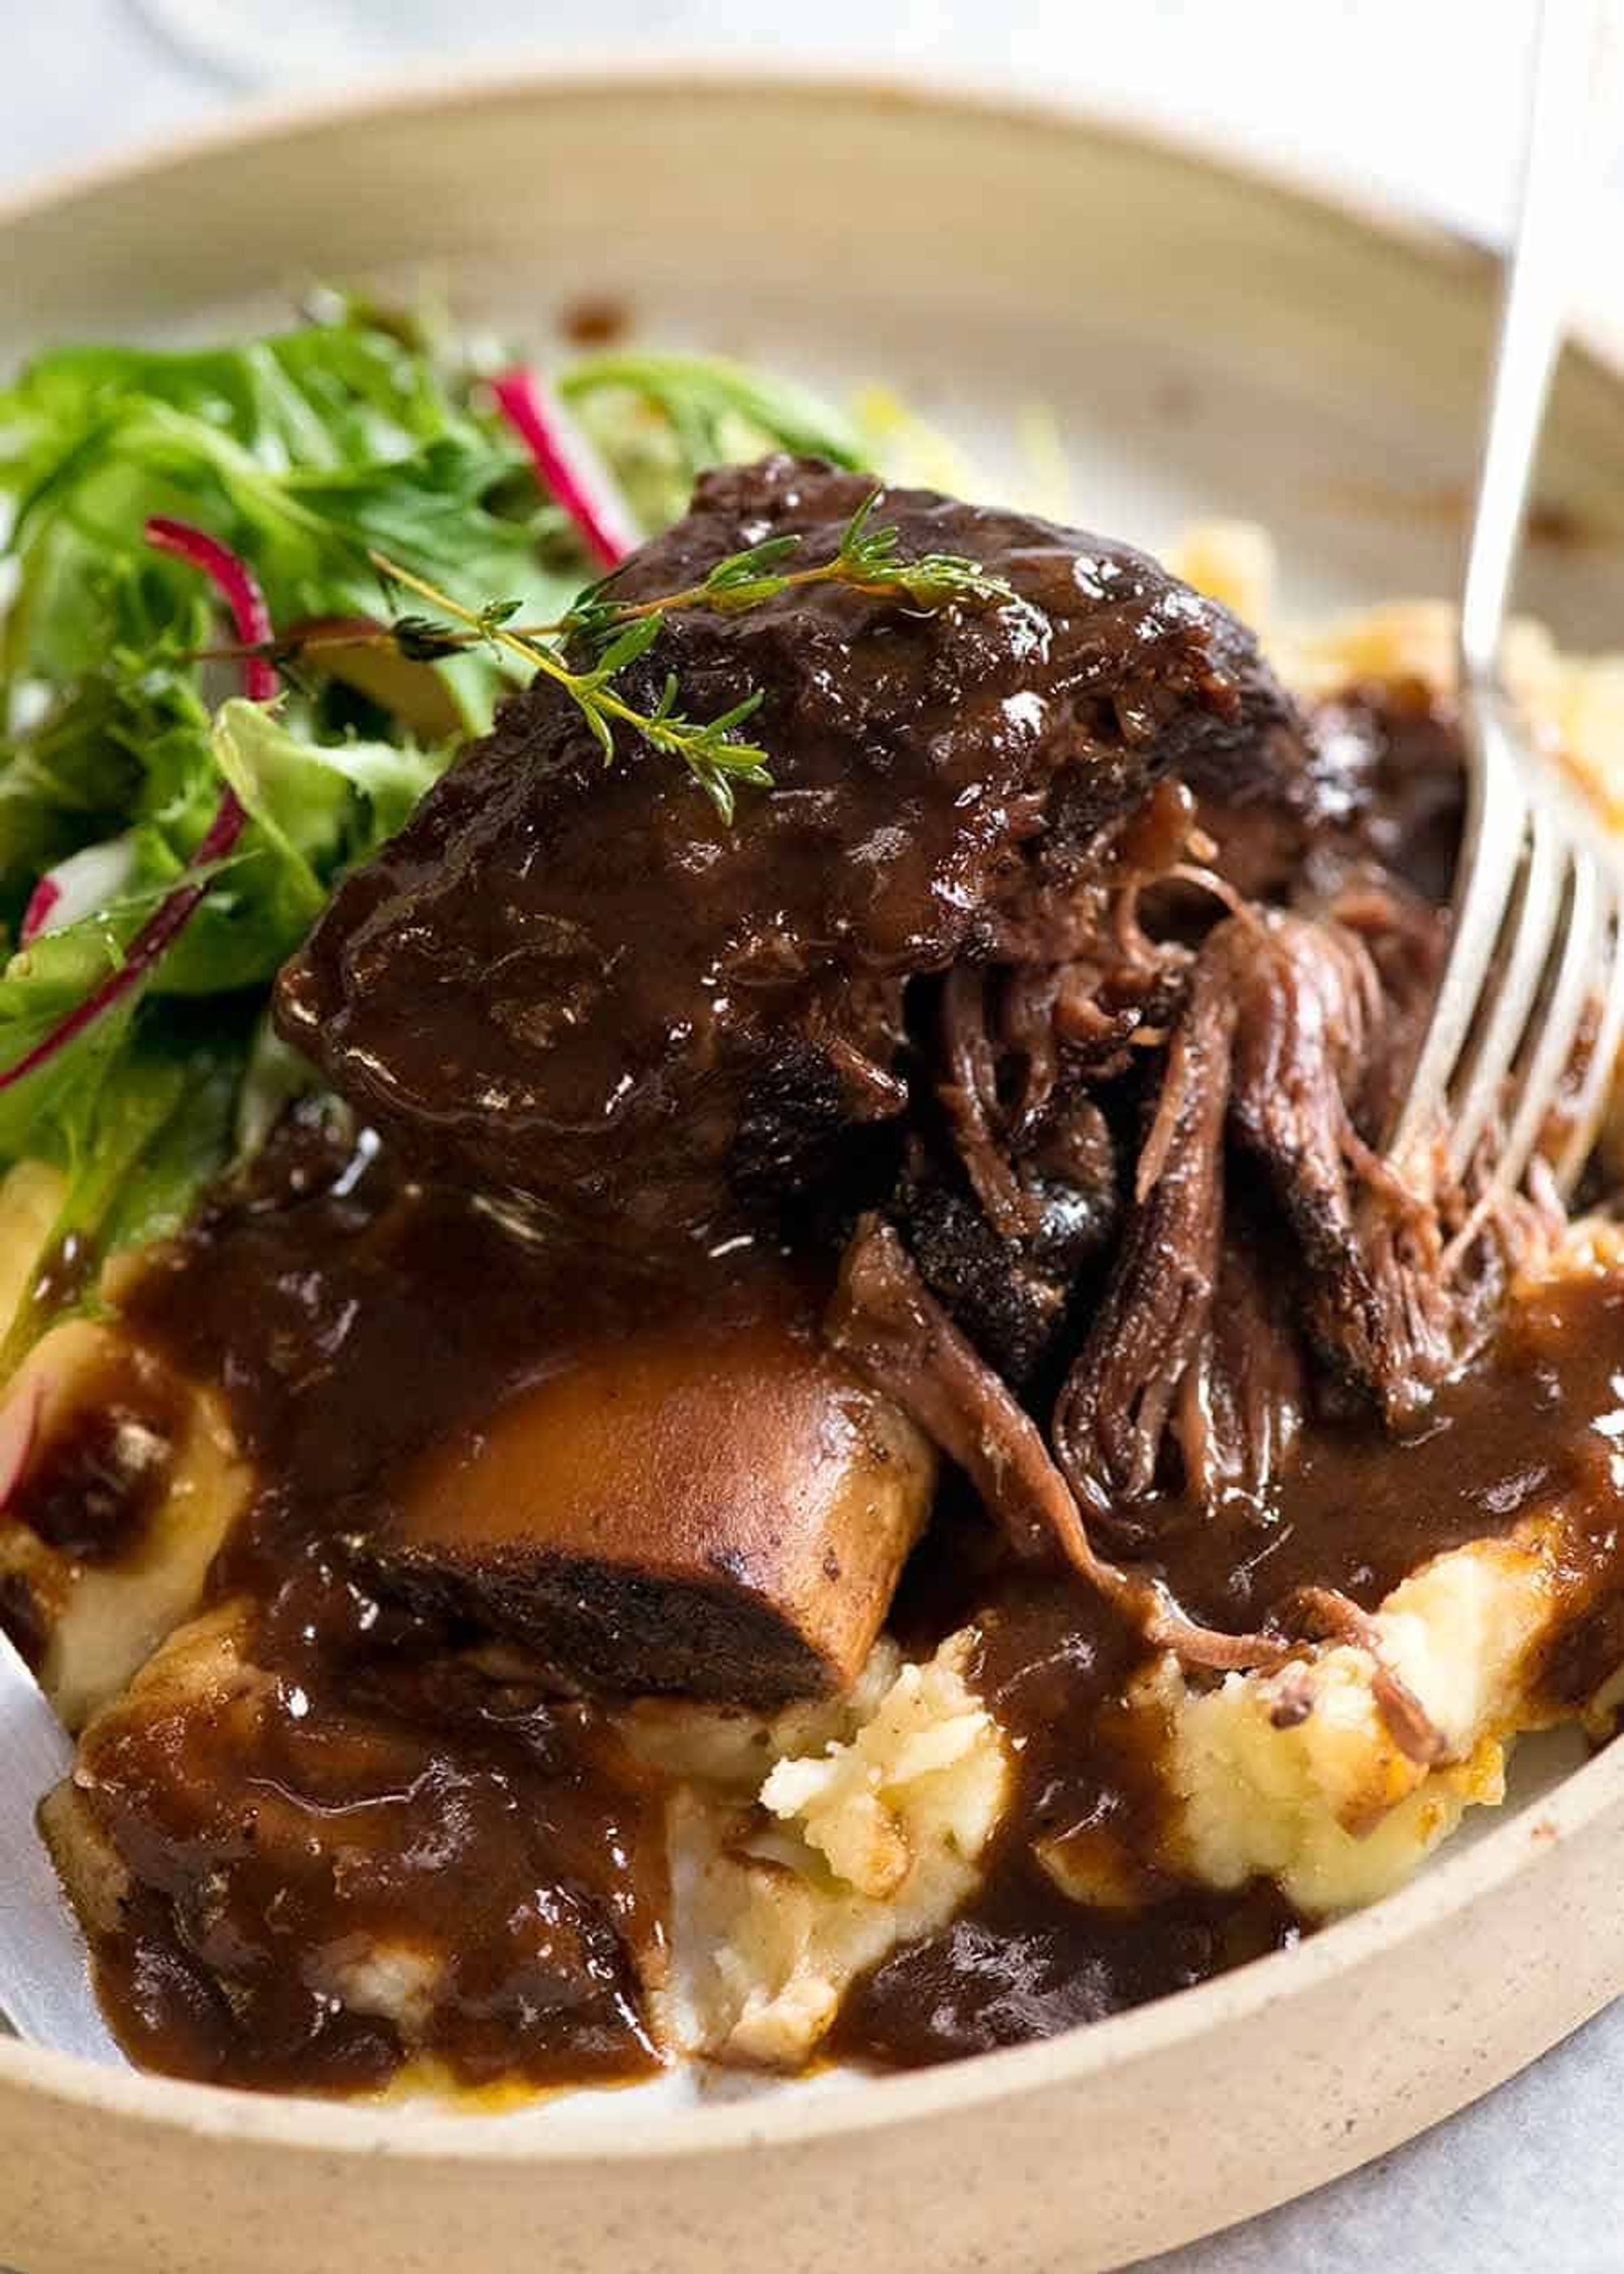 Braised Beef Short Ribs in Red Wine Sauce | RecipeTin Eats - My Recipe ...